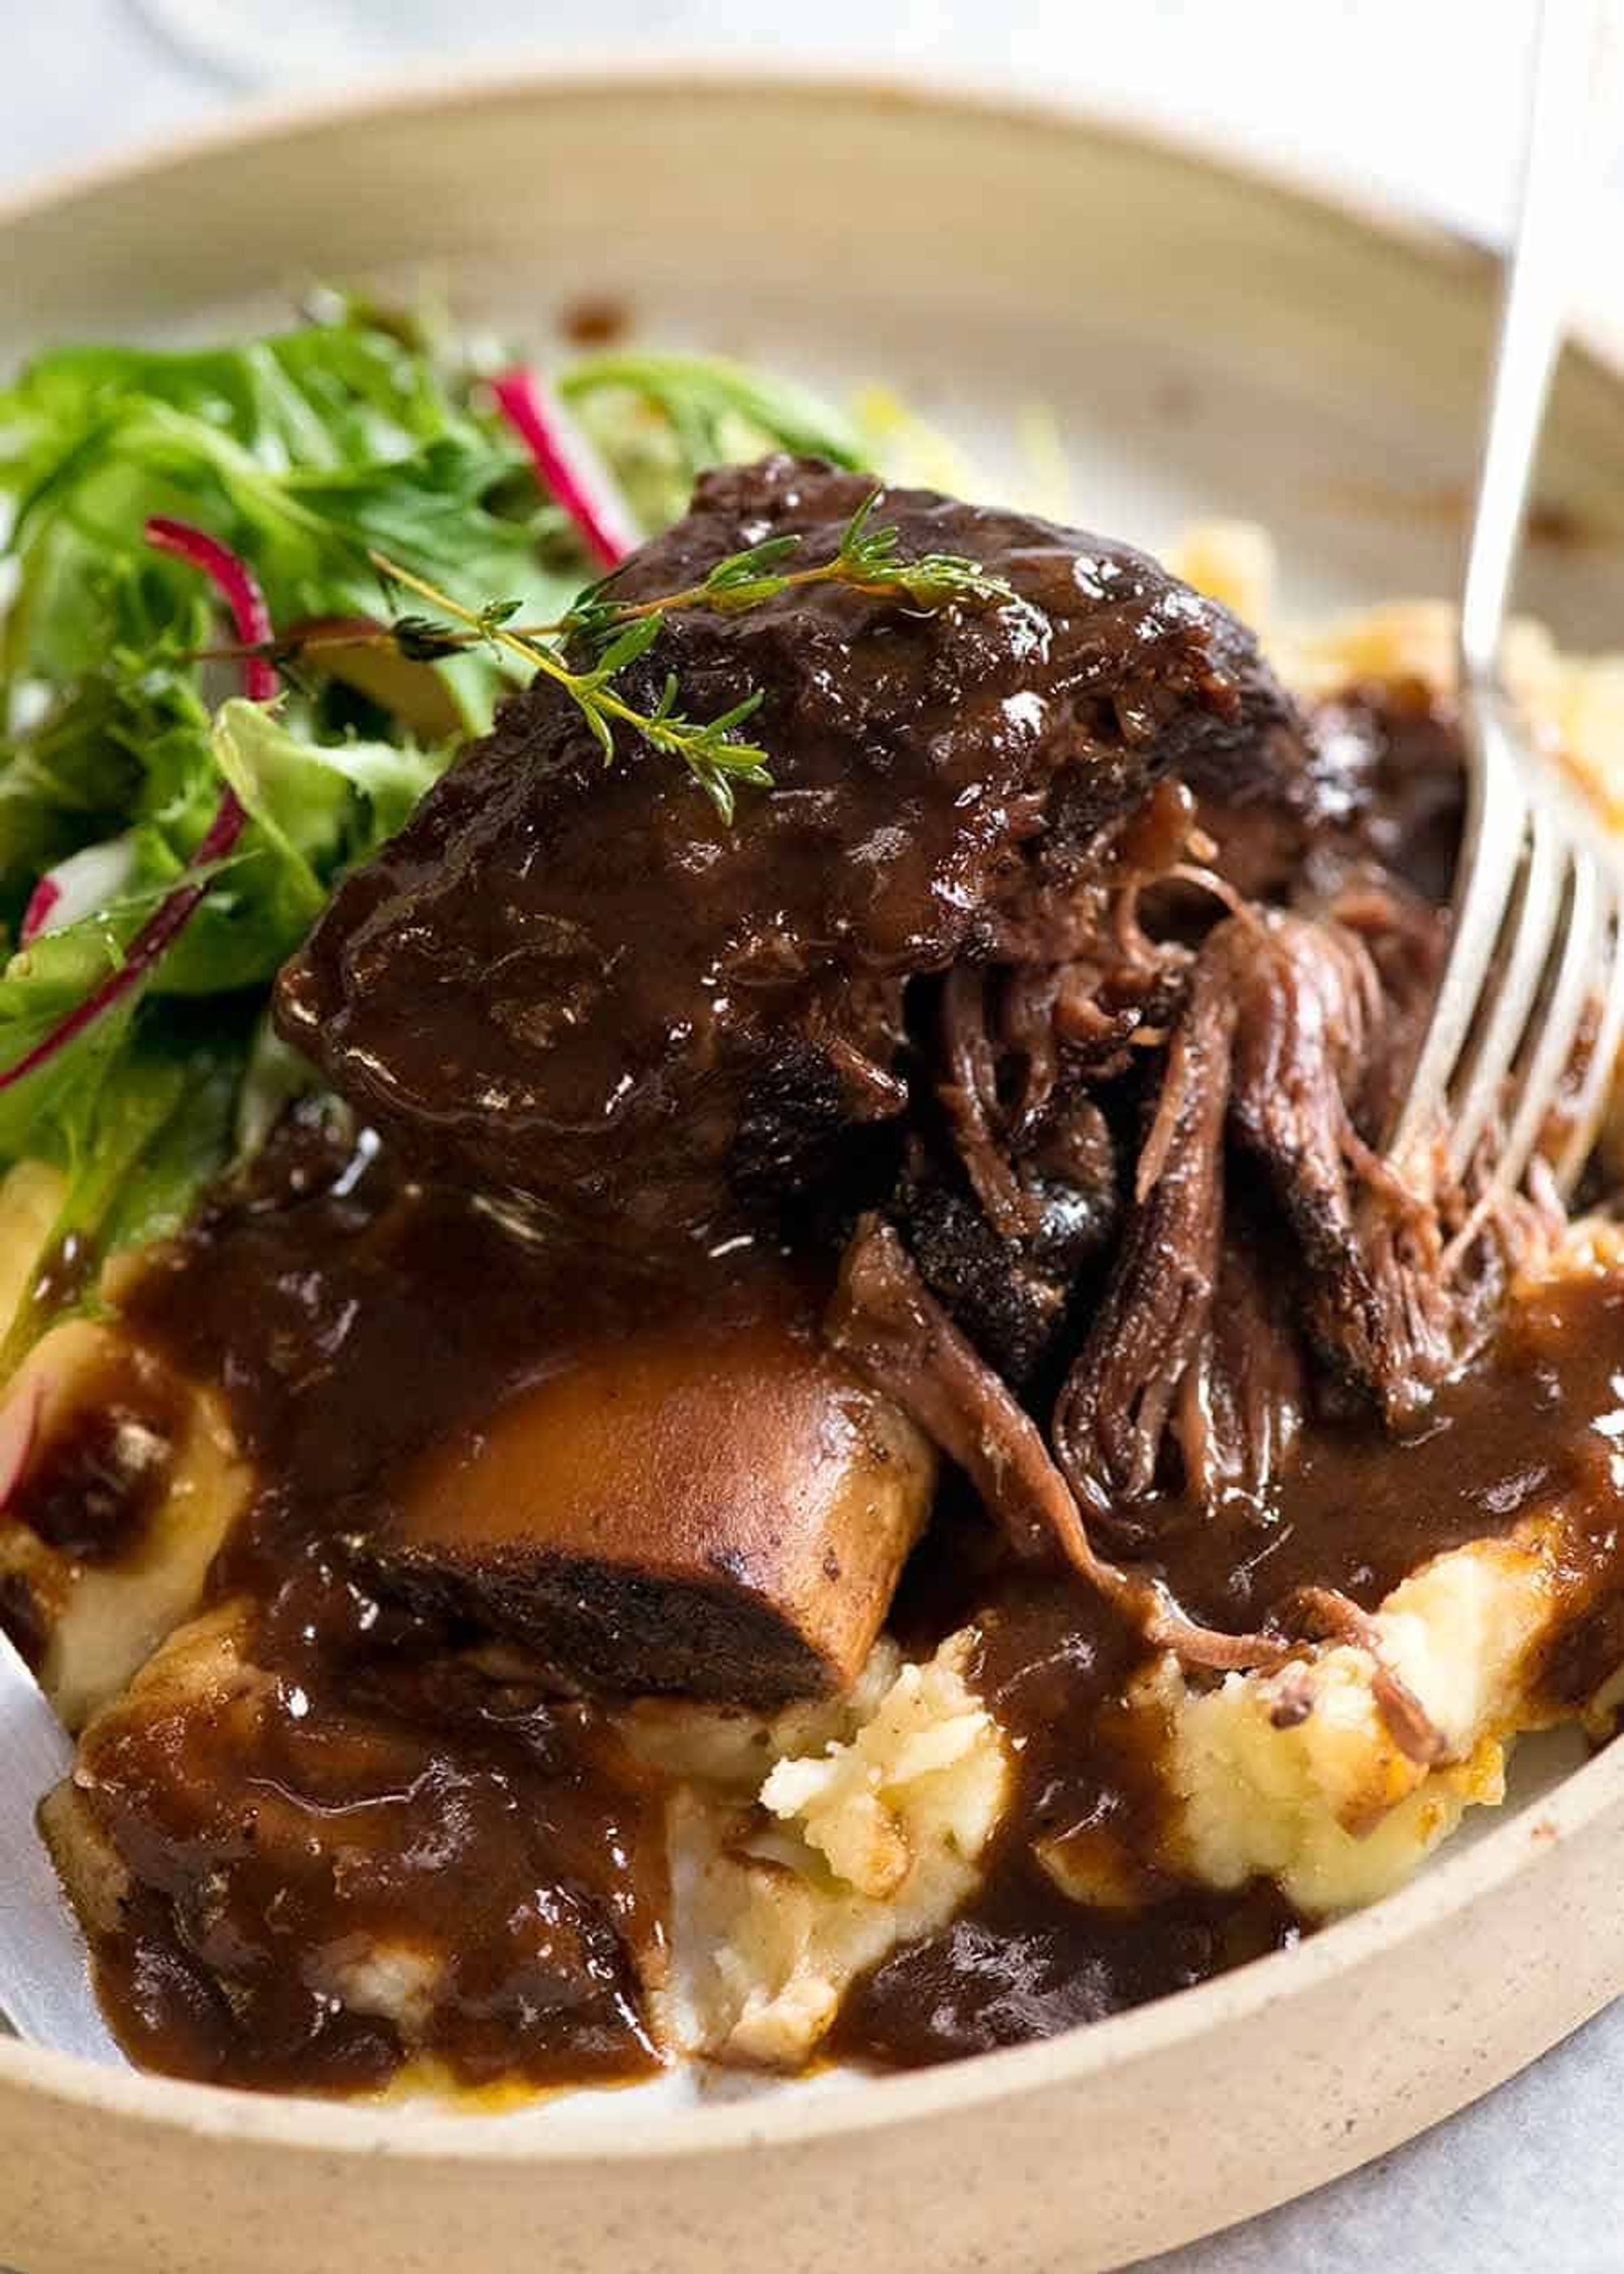 Braised Beef Short Ribs in Red Wine Sauce | RecipeTin Eats - My Recipe ...